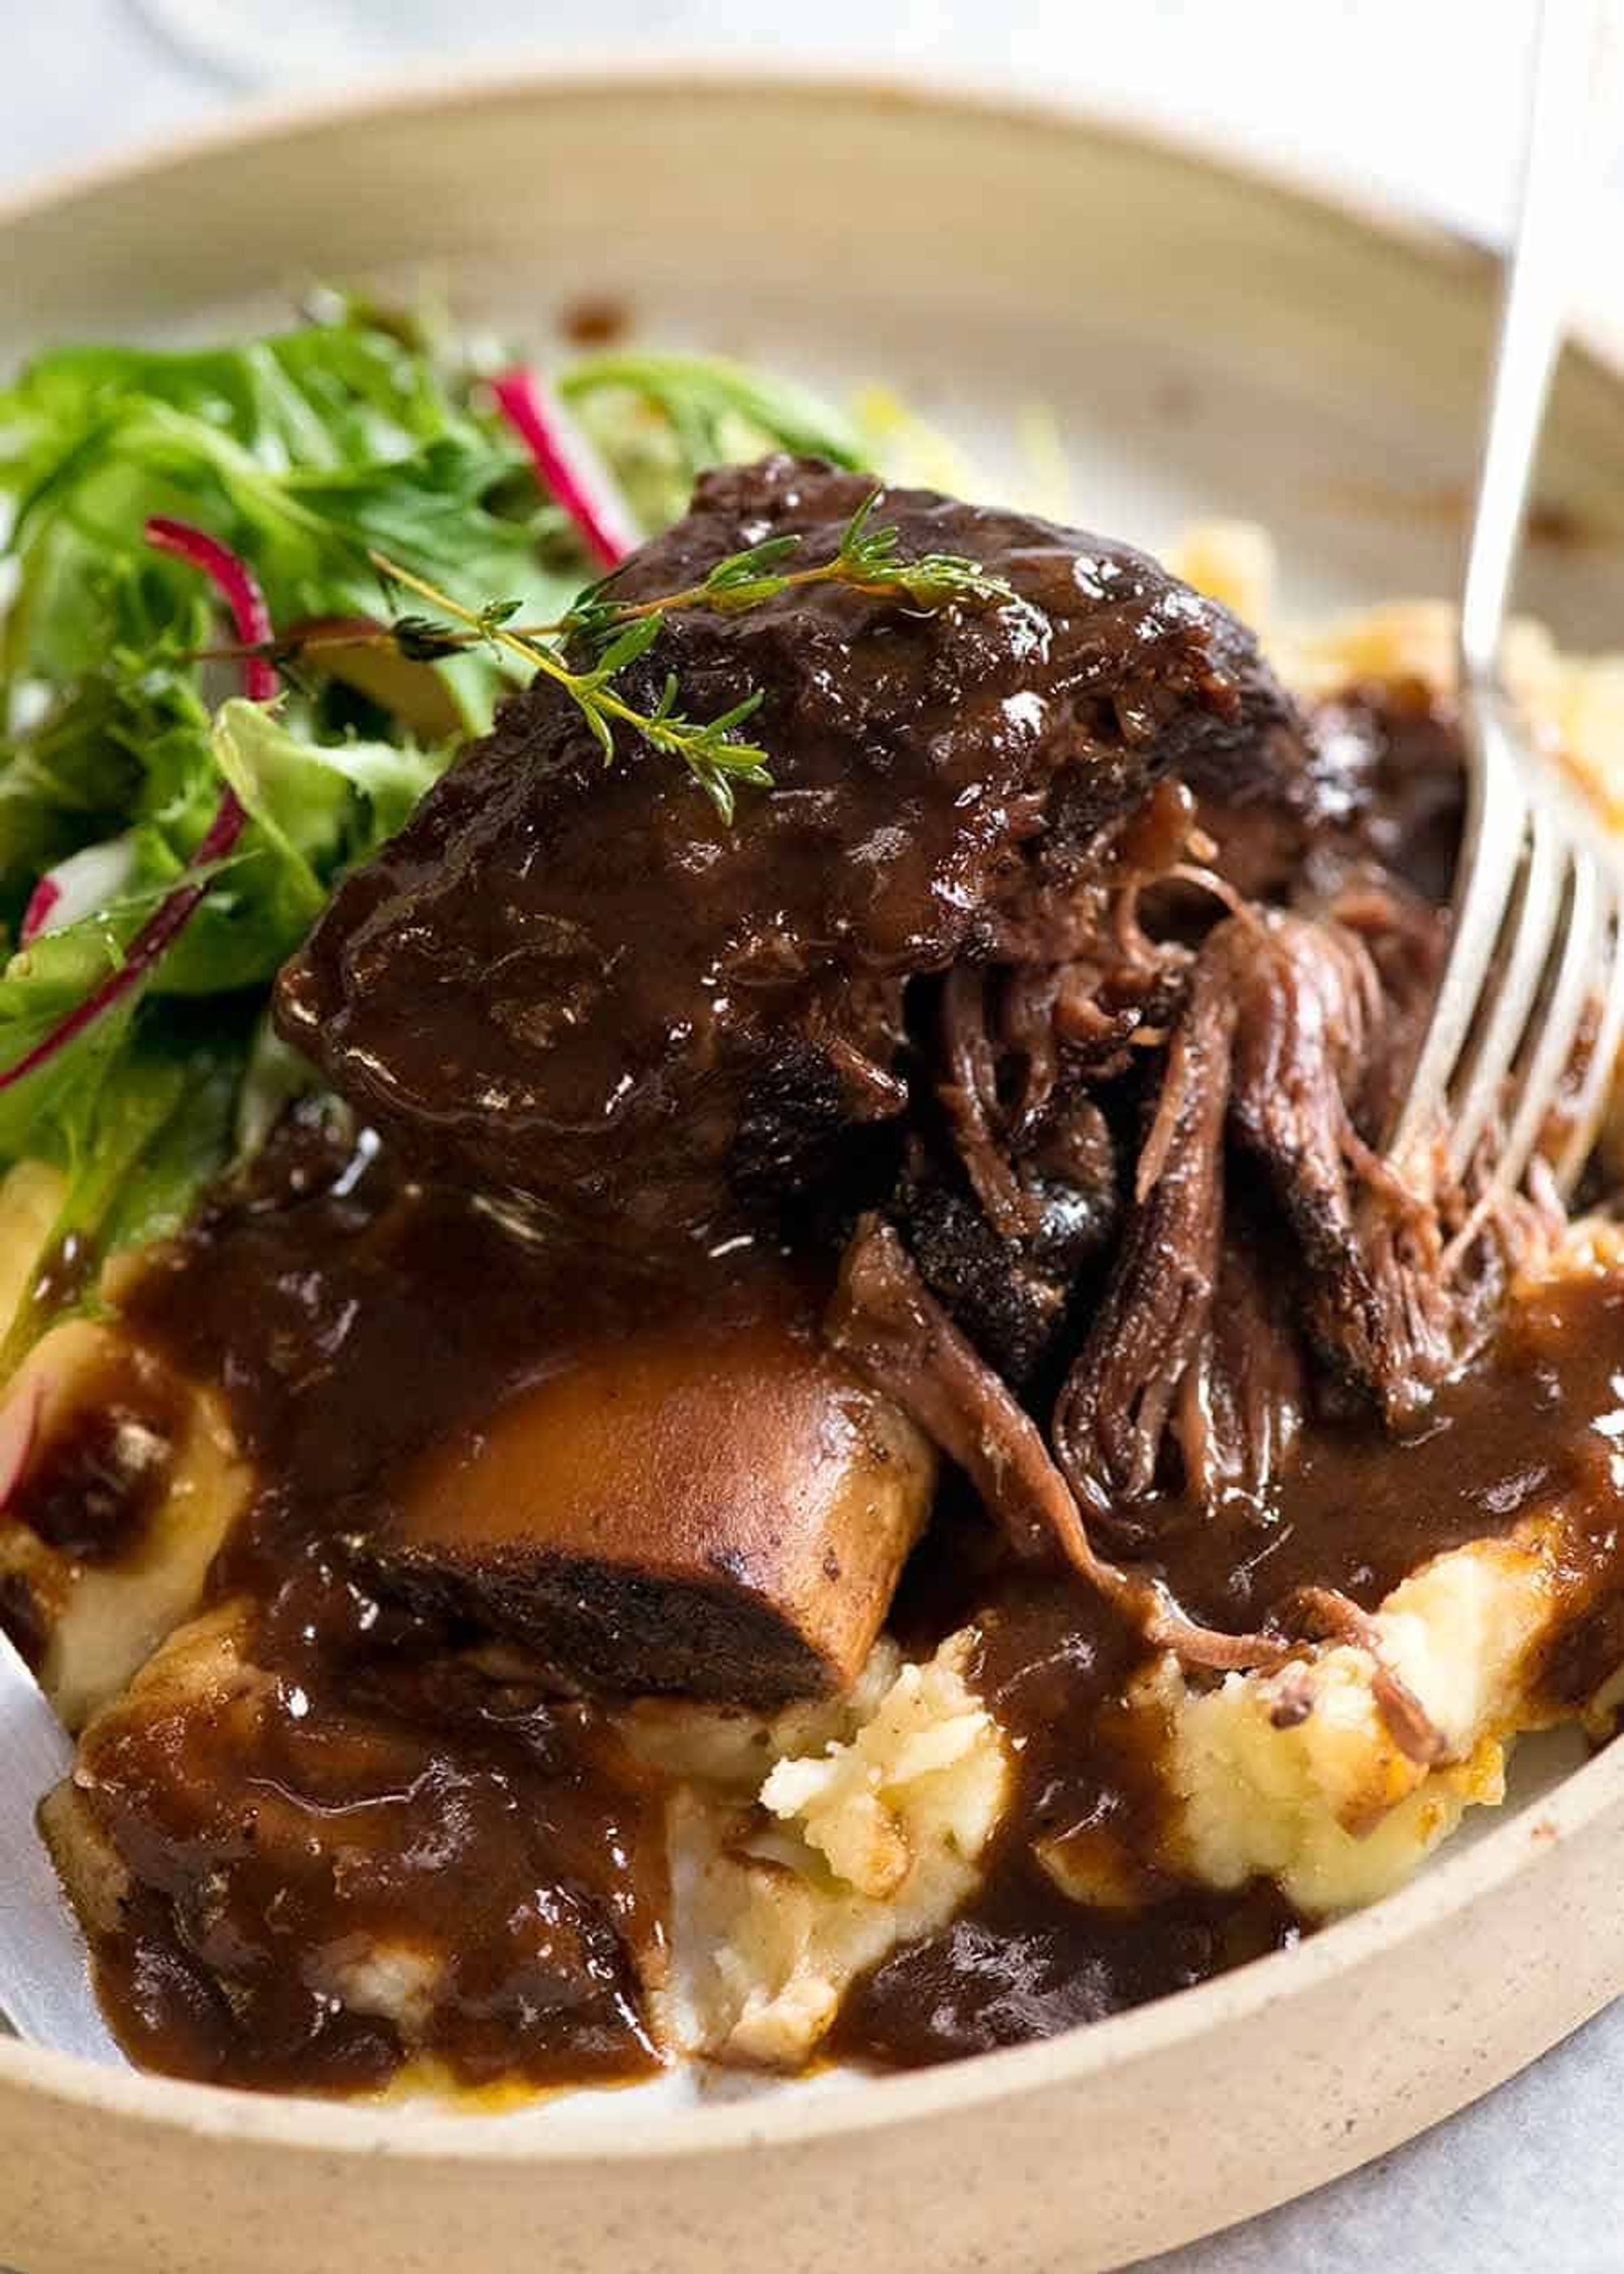 Braised Beef Short Ribs in Red Wine Sauce | RecipeTin Eats - My Recipe ...